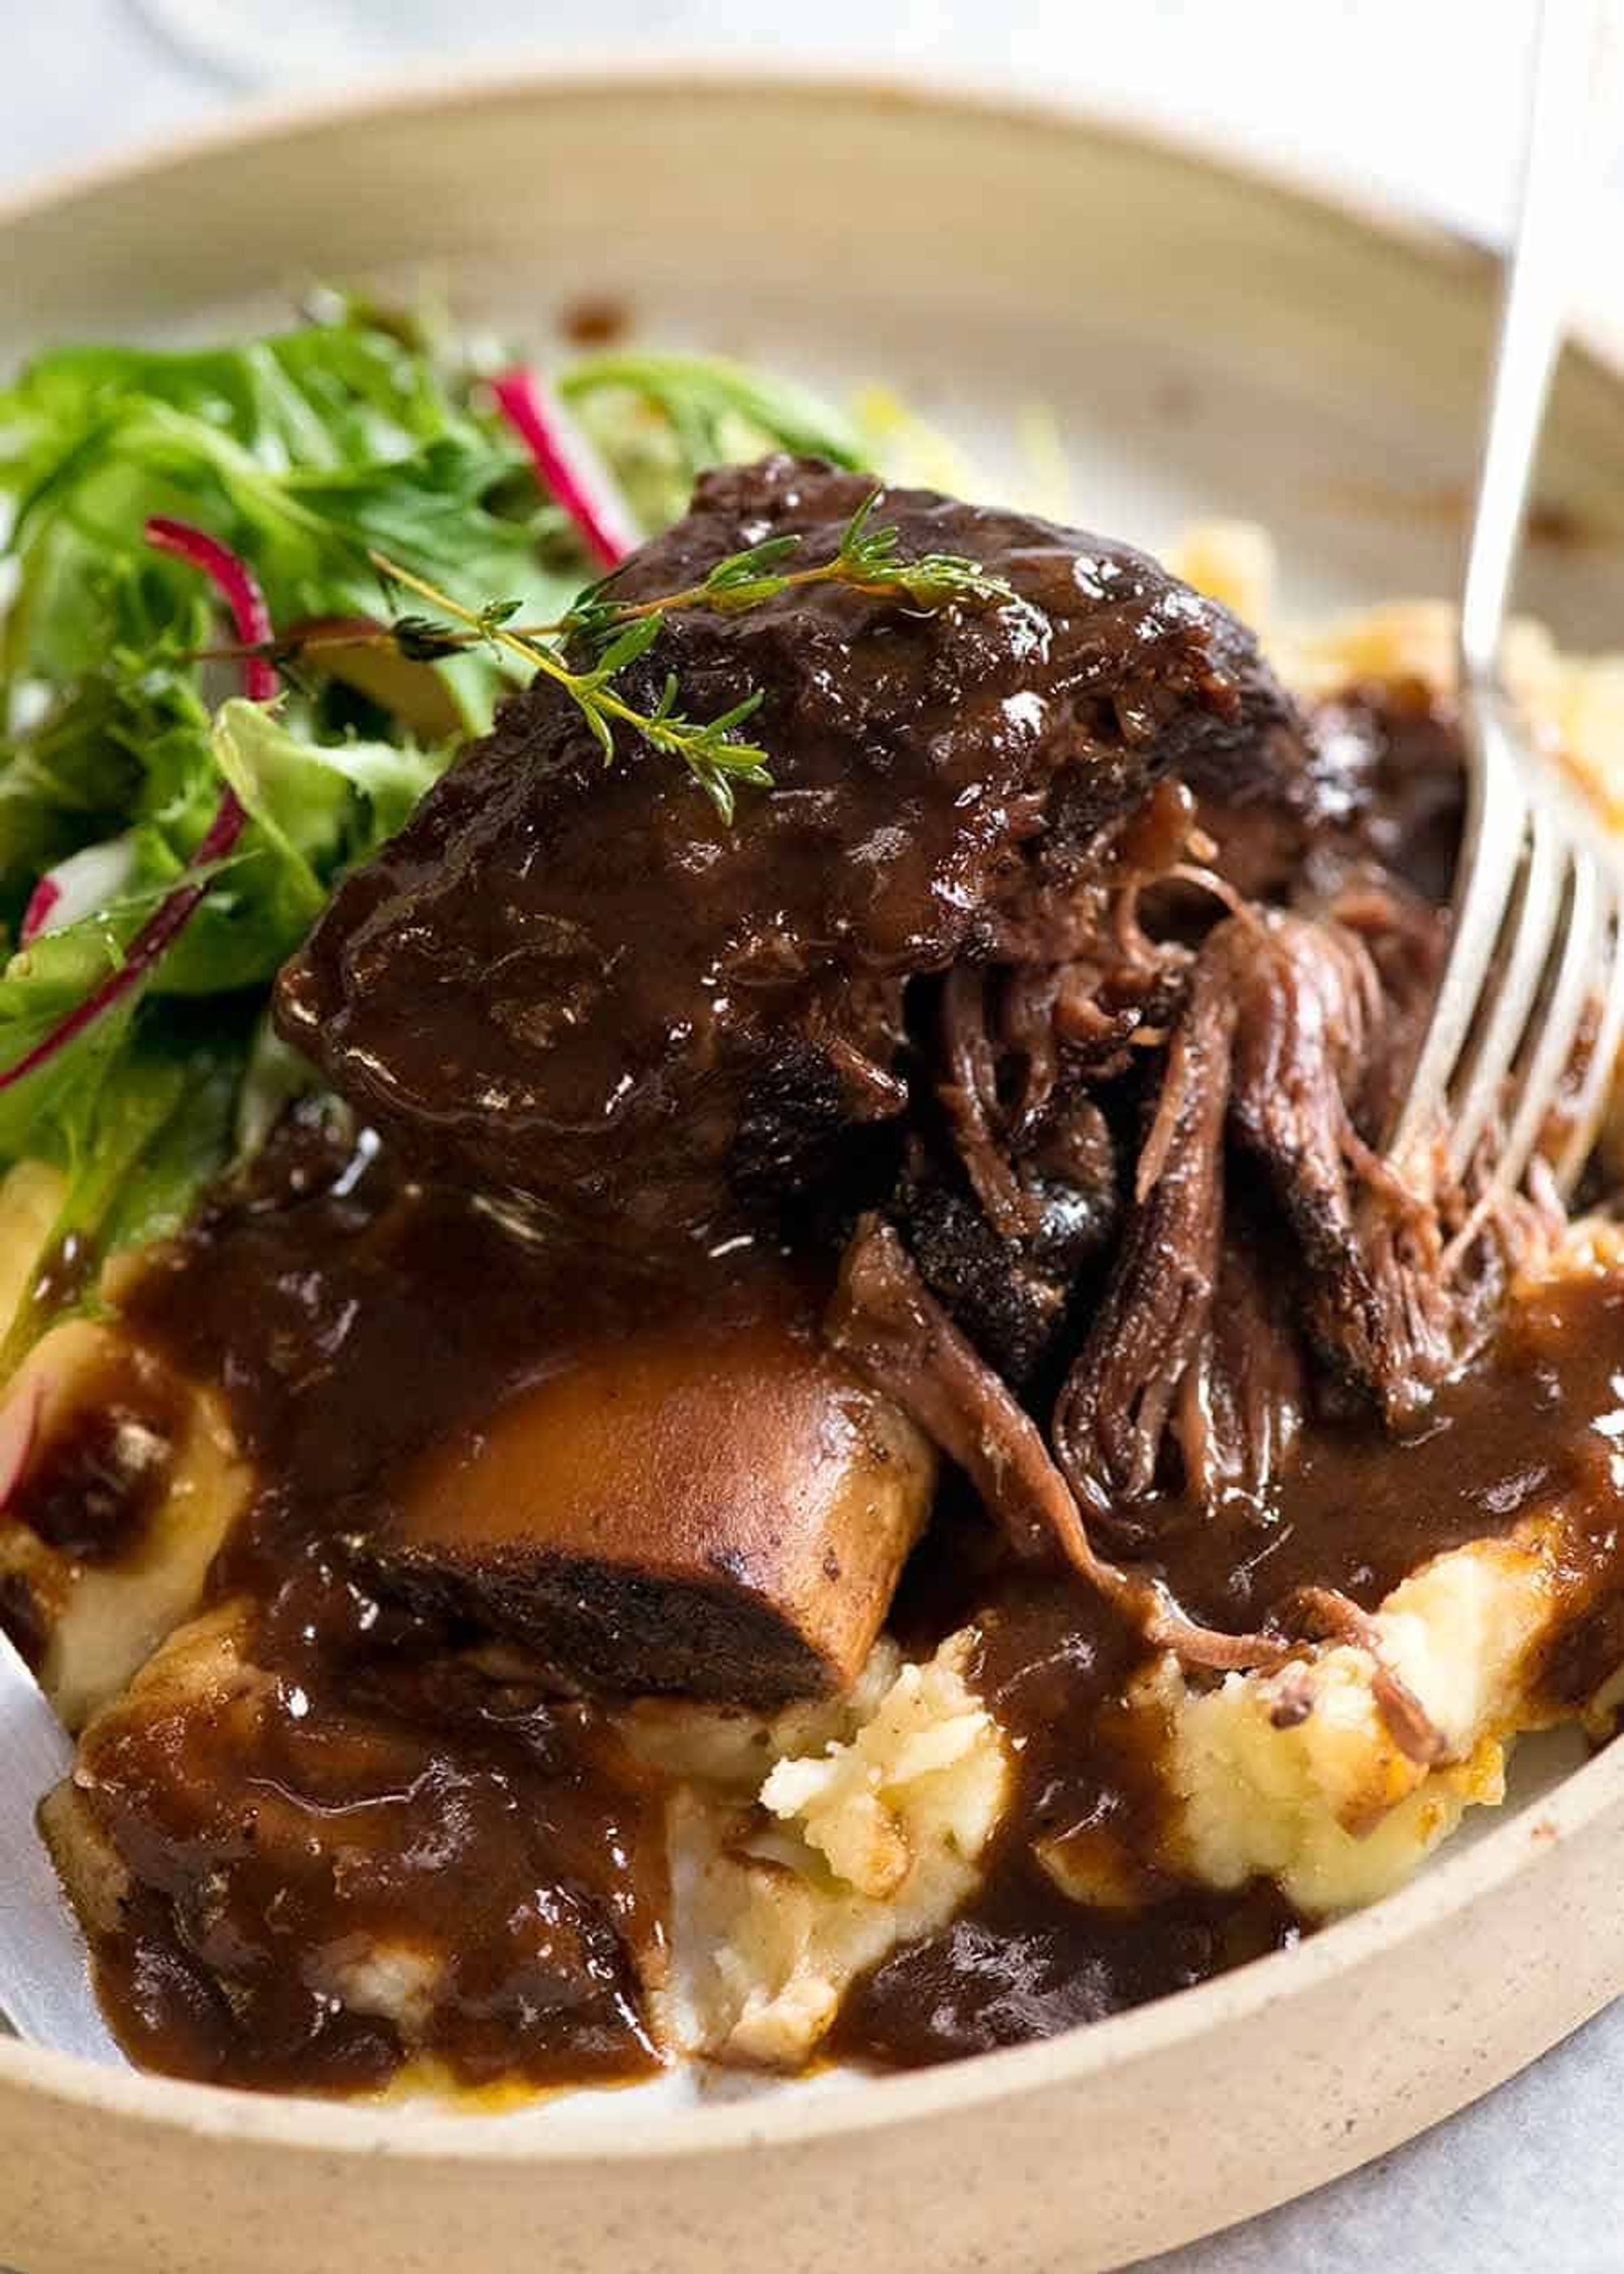 Braised Beef Short Ribs in Red Wine Sauce | RecipeTin Eats - My Recipe ...